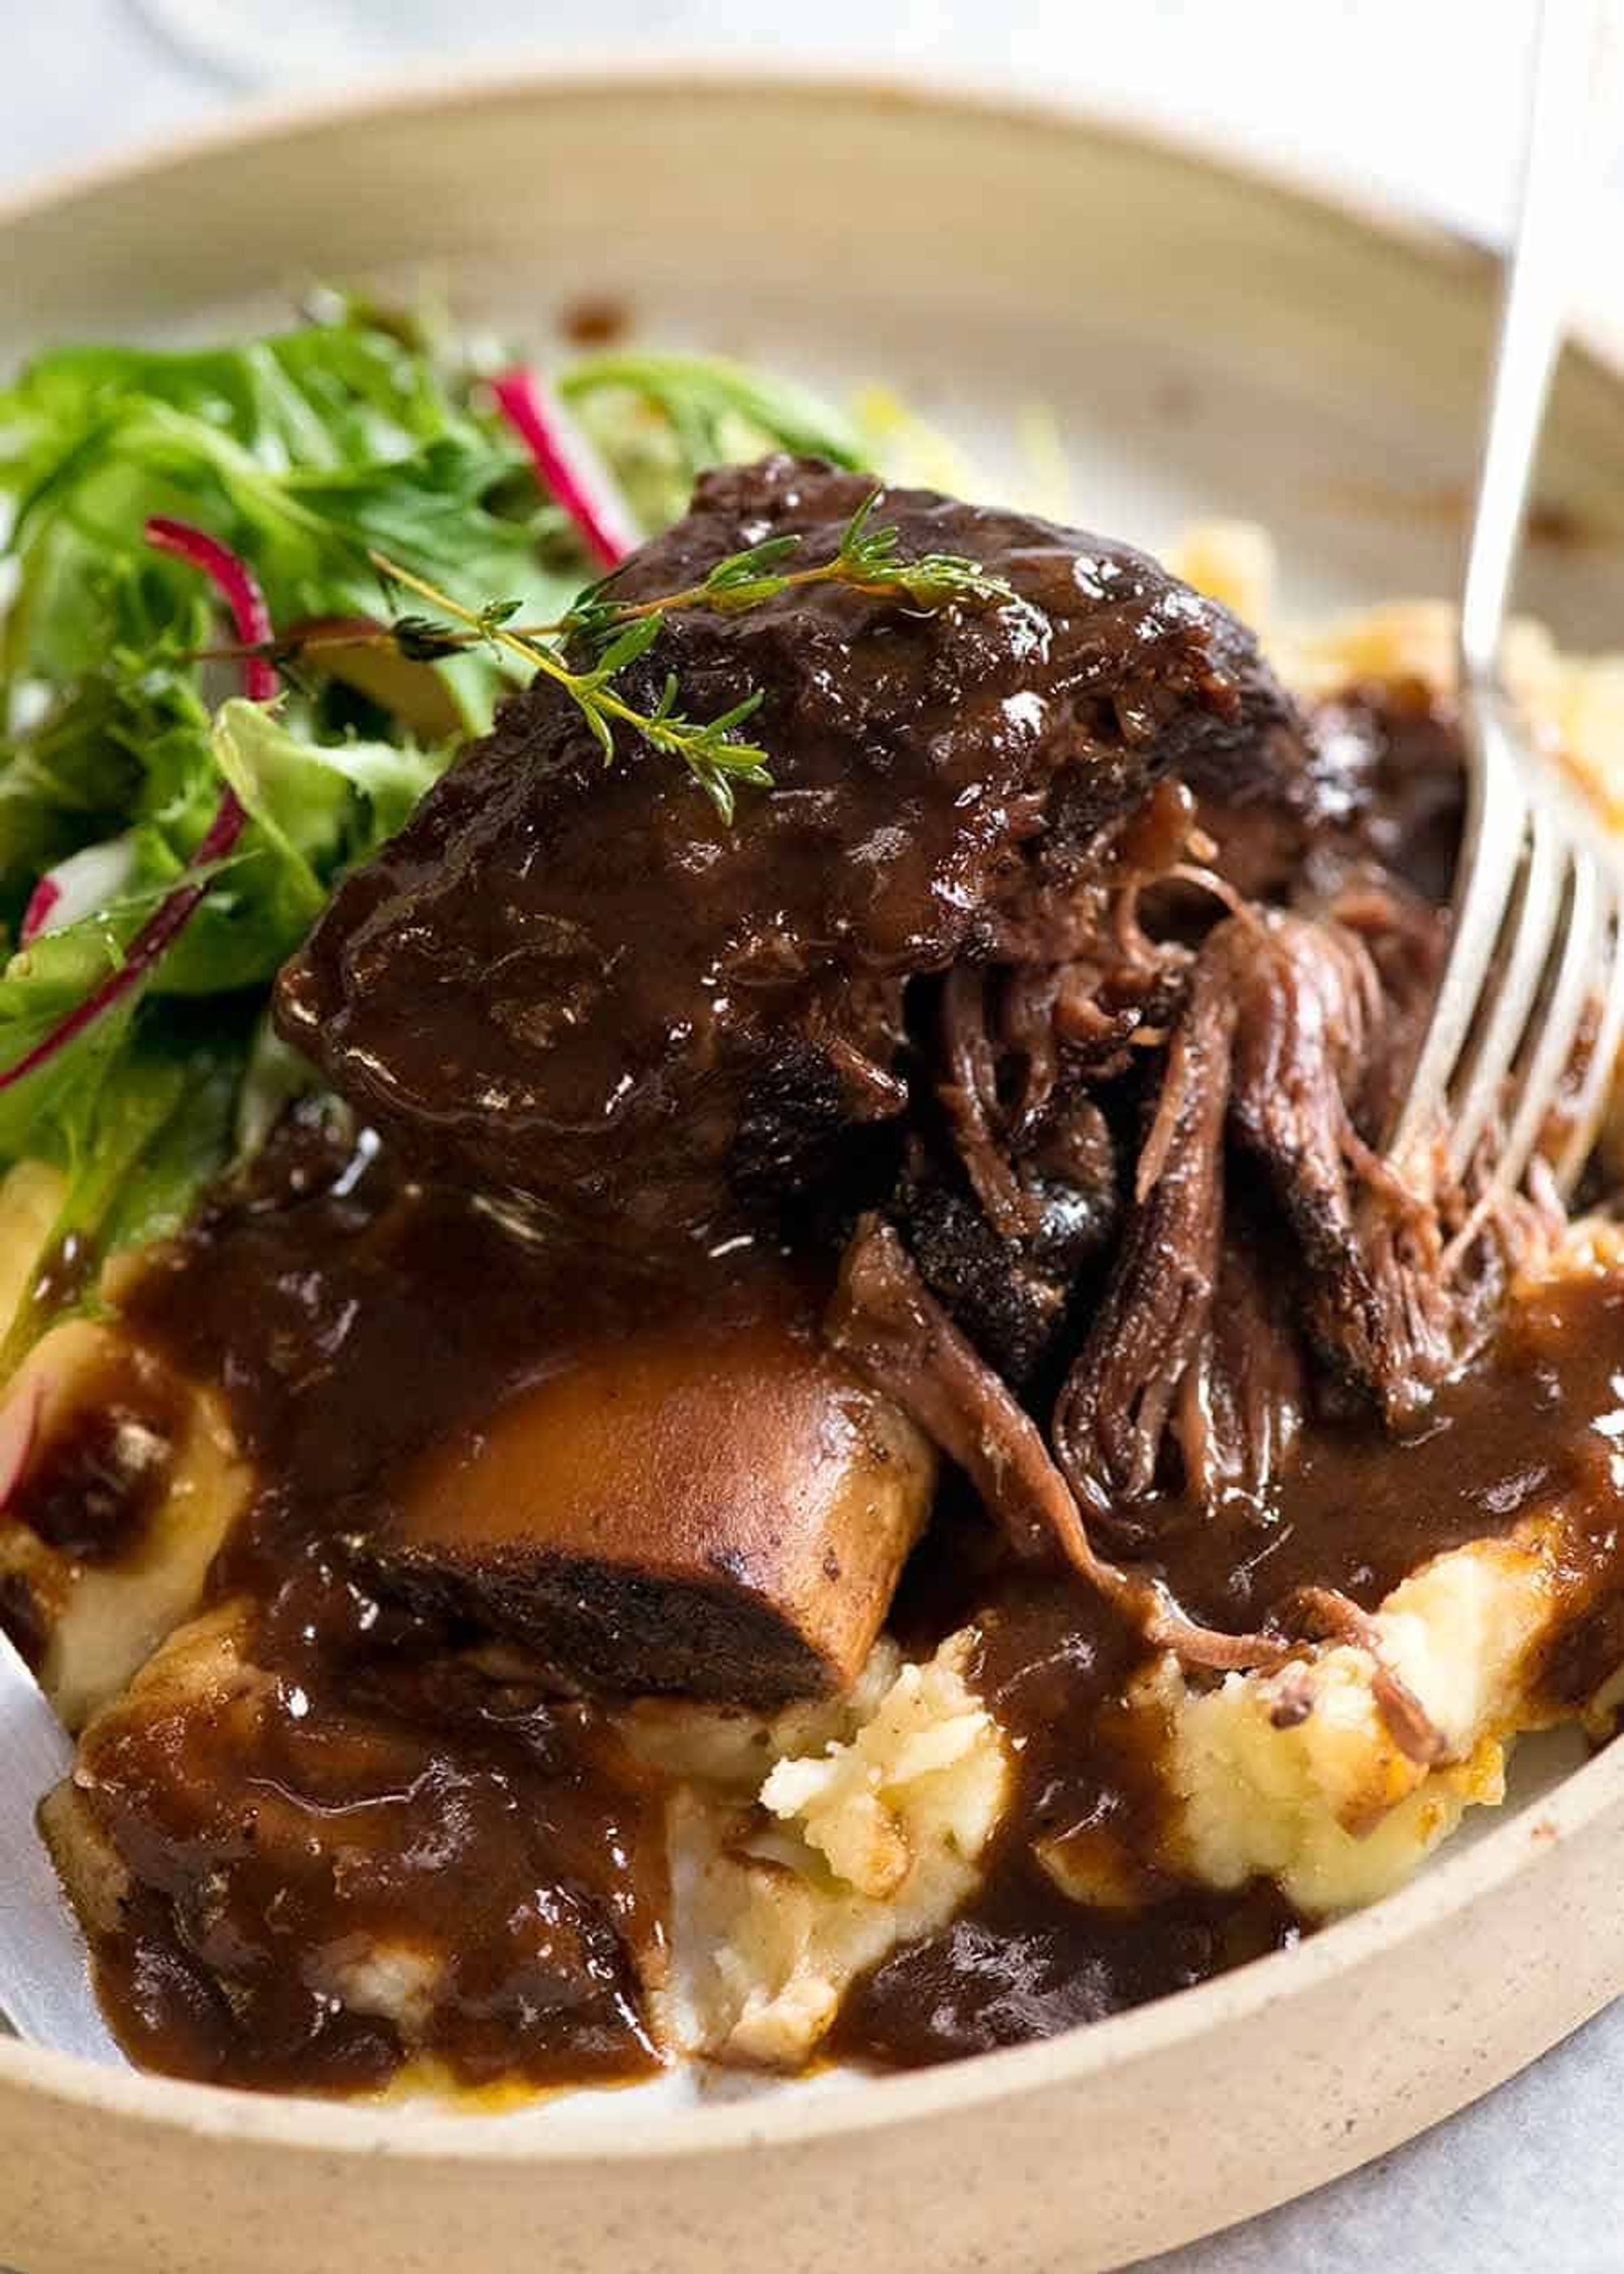 Braised Beef Short Ribs in Red Wine Sauce | RecipeTin Eats - My Recipe ...